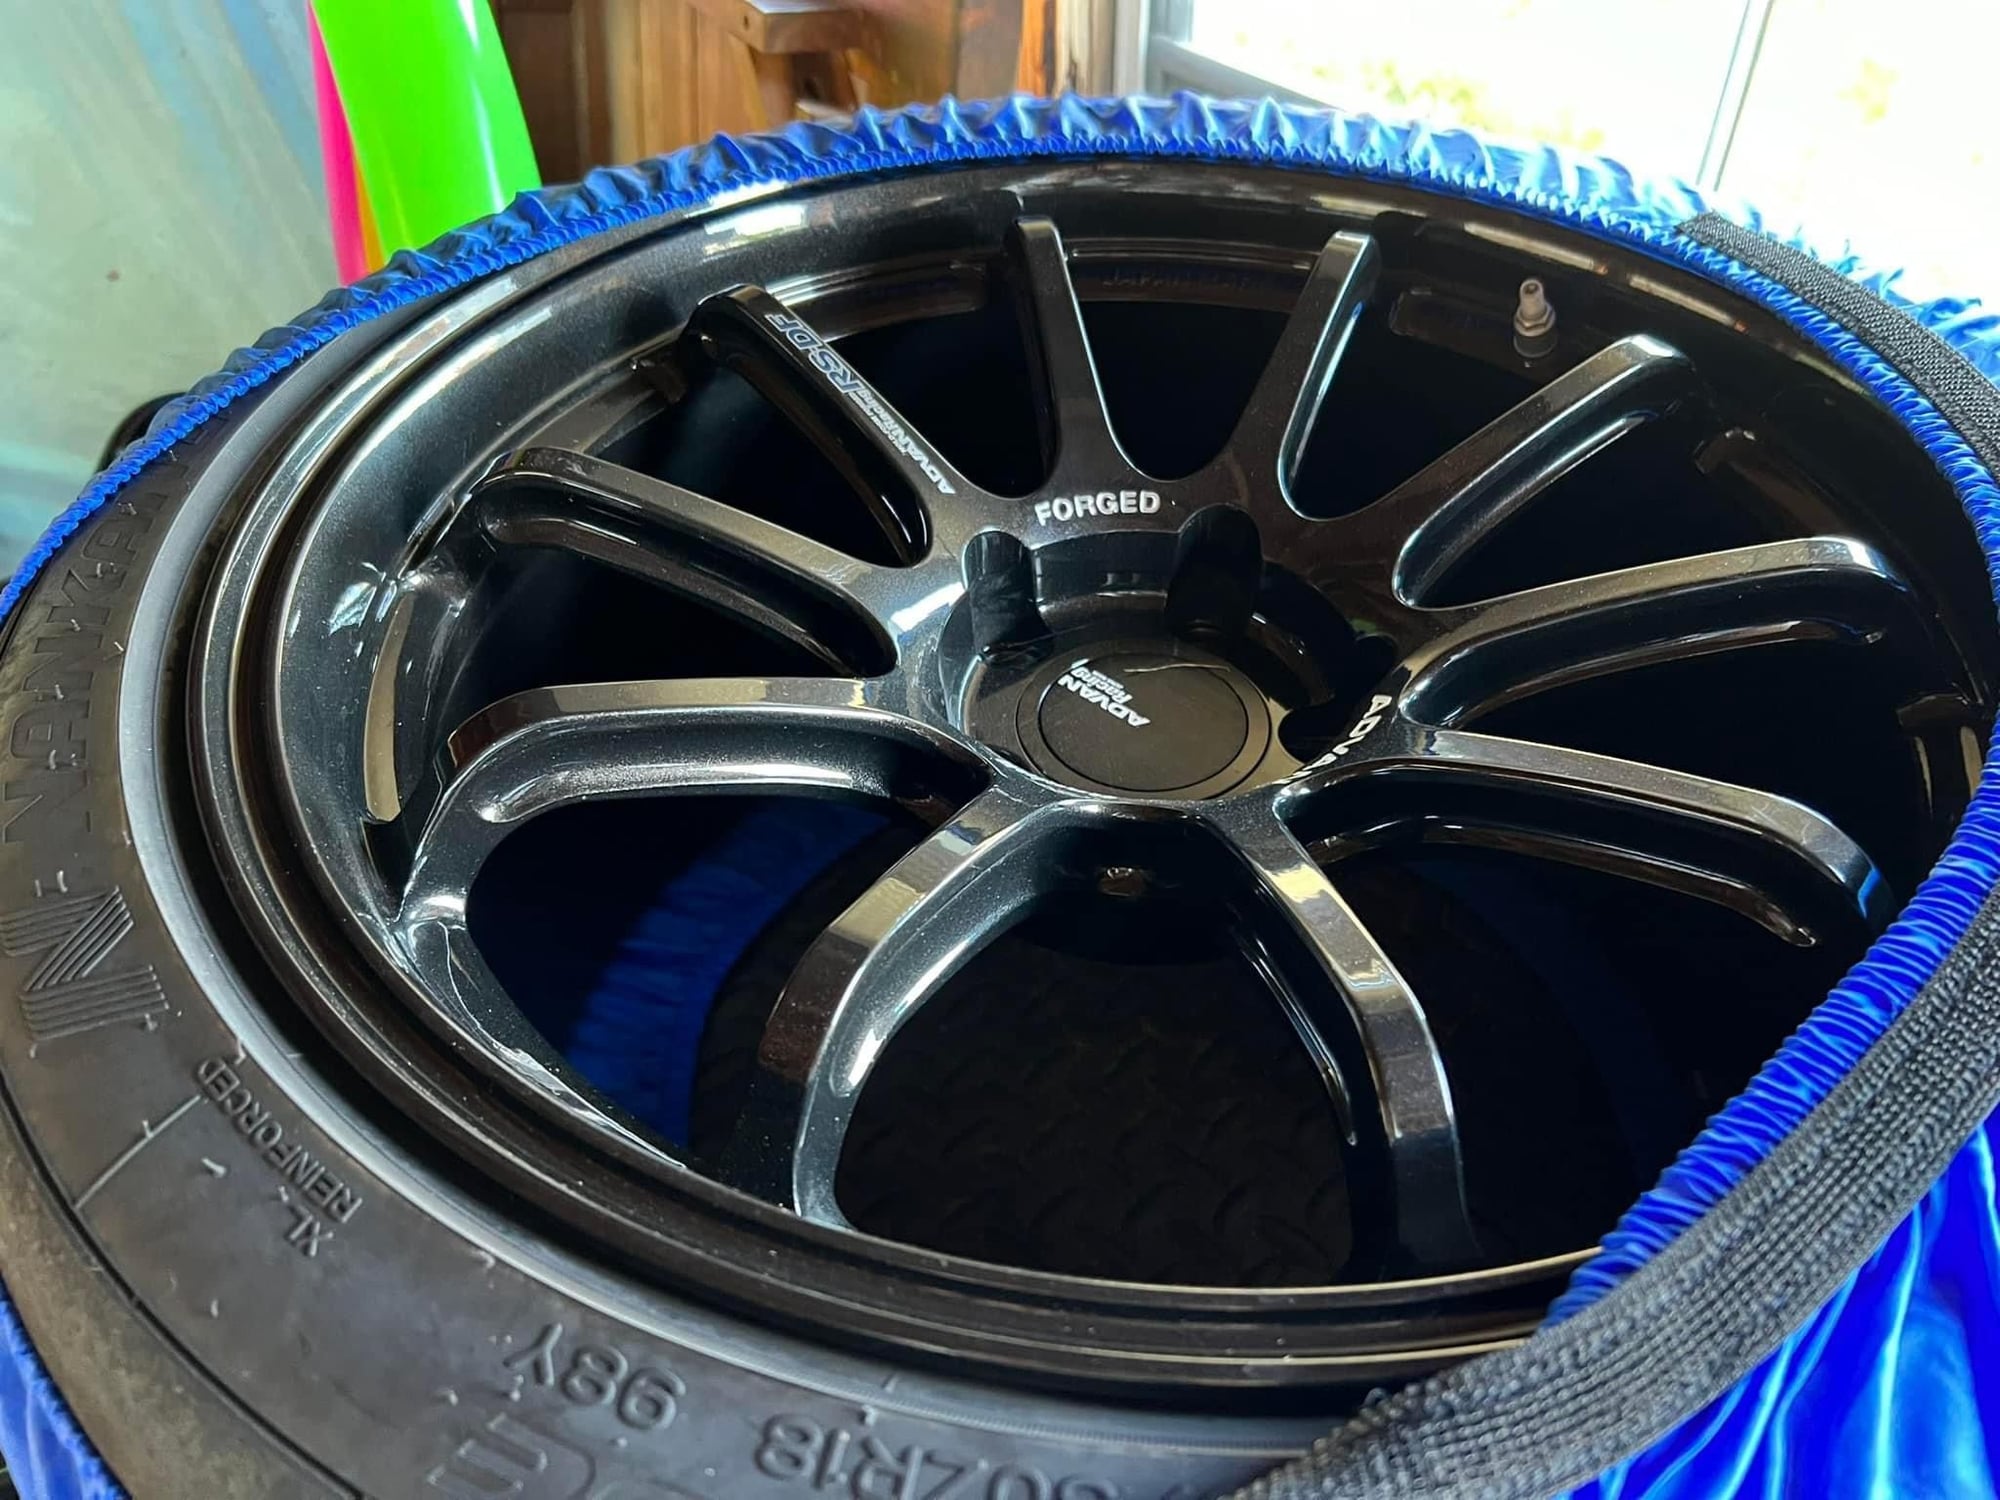 Wheels and Tires/Axles - Advan RS-DF 18x10.5 with Nankang AR1 tires - Used - Quincy, MA 2169, United States